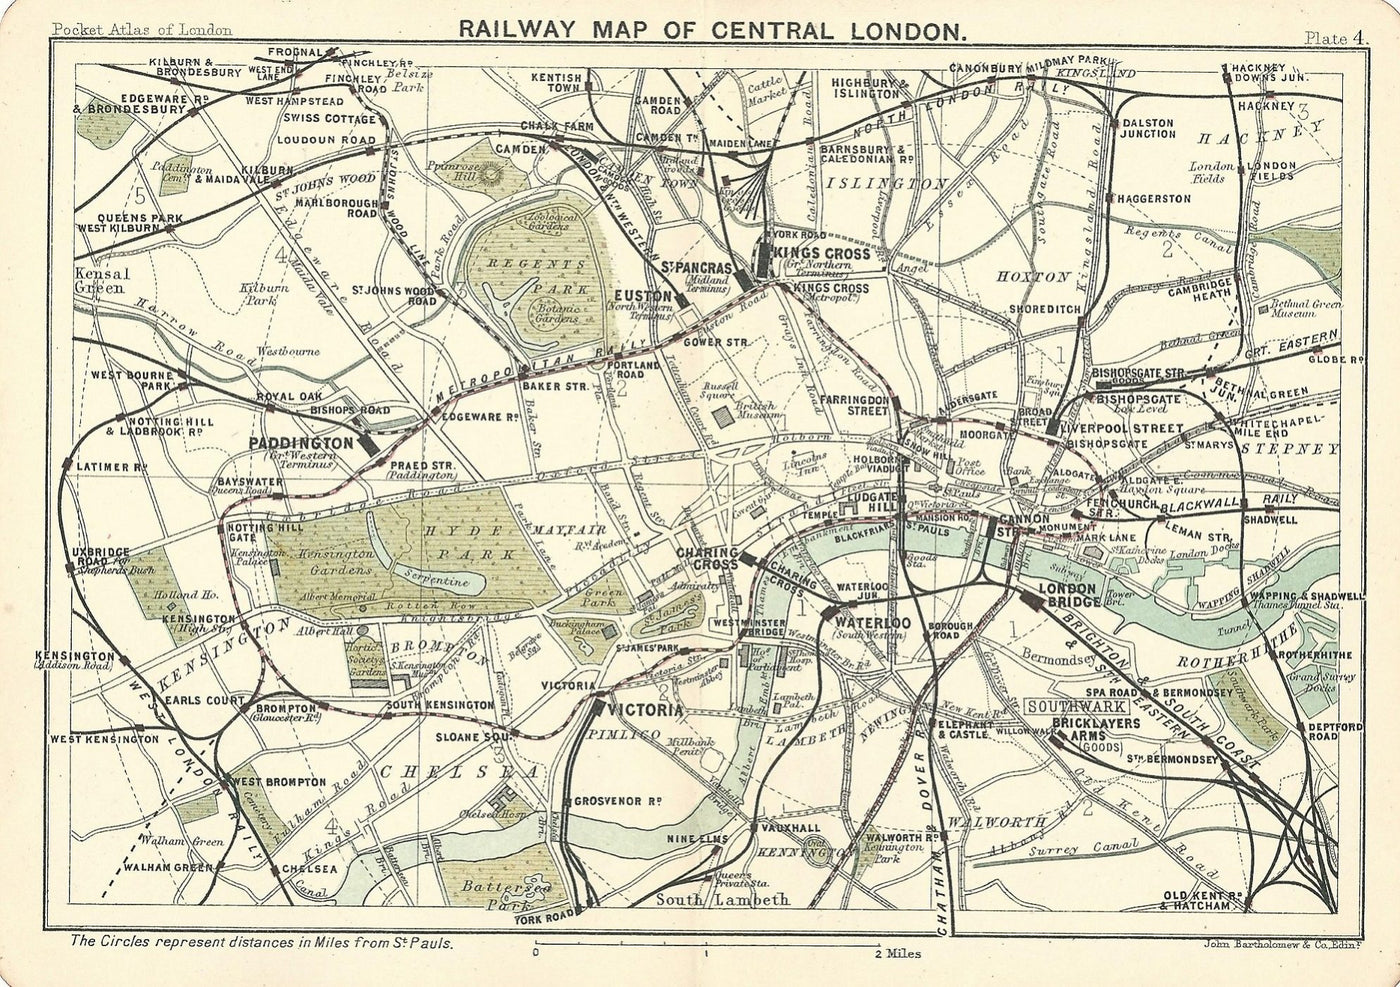 Railway map of Central London published 1891